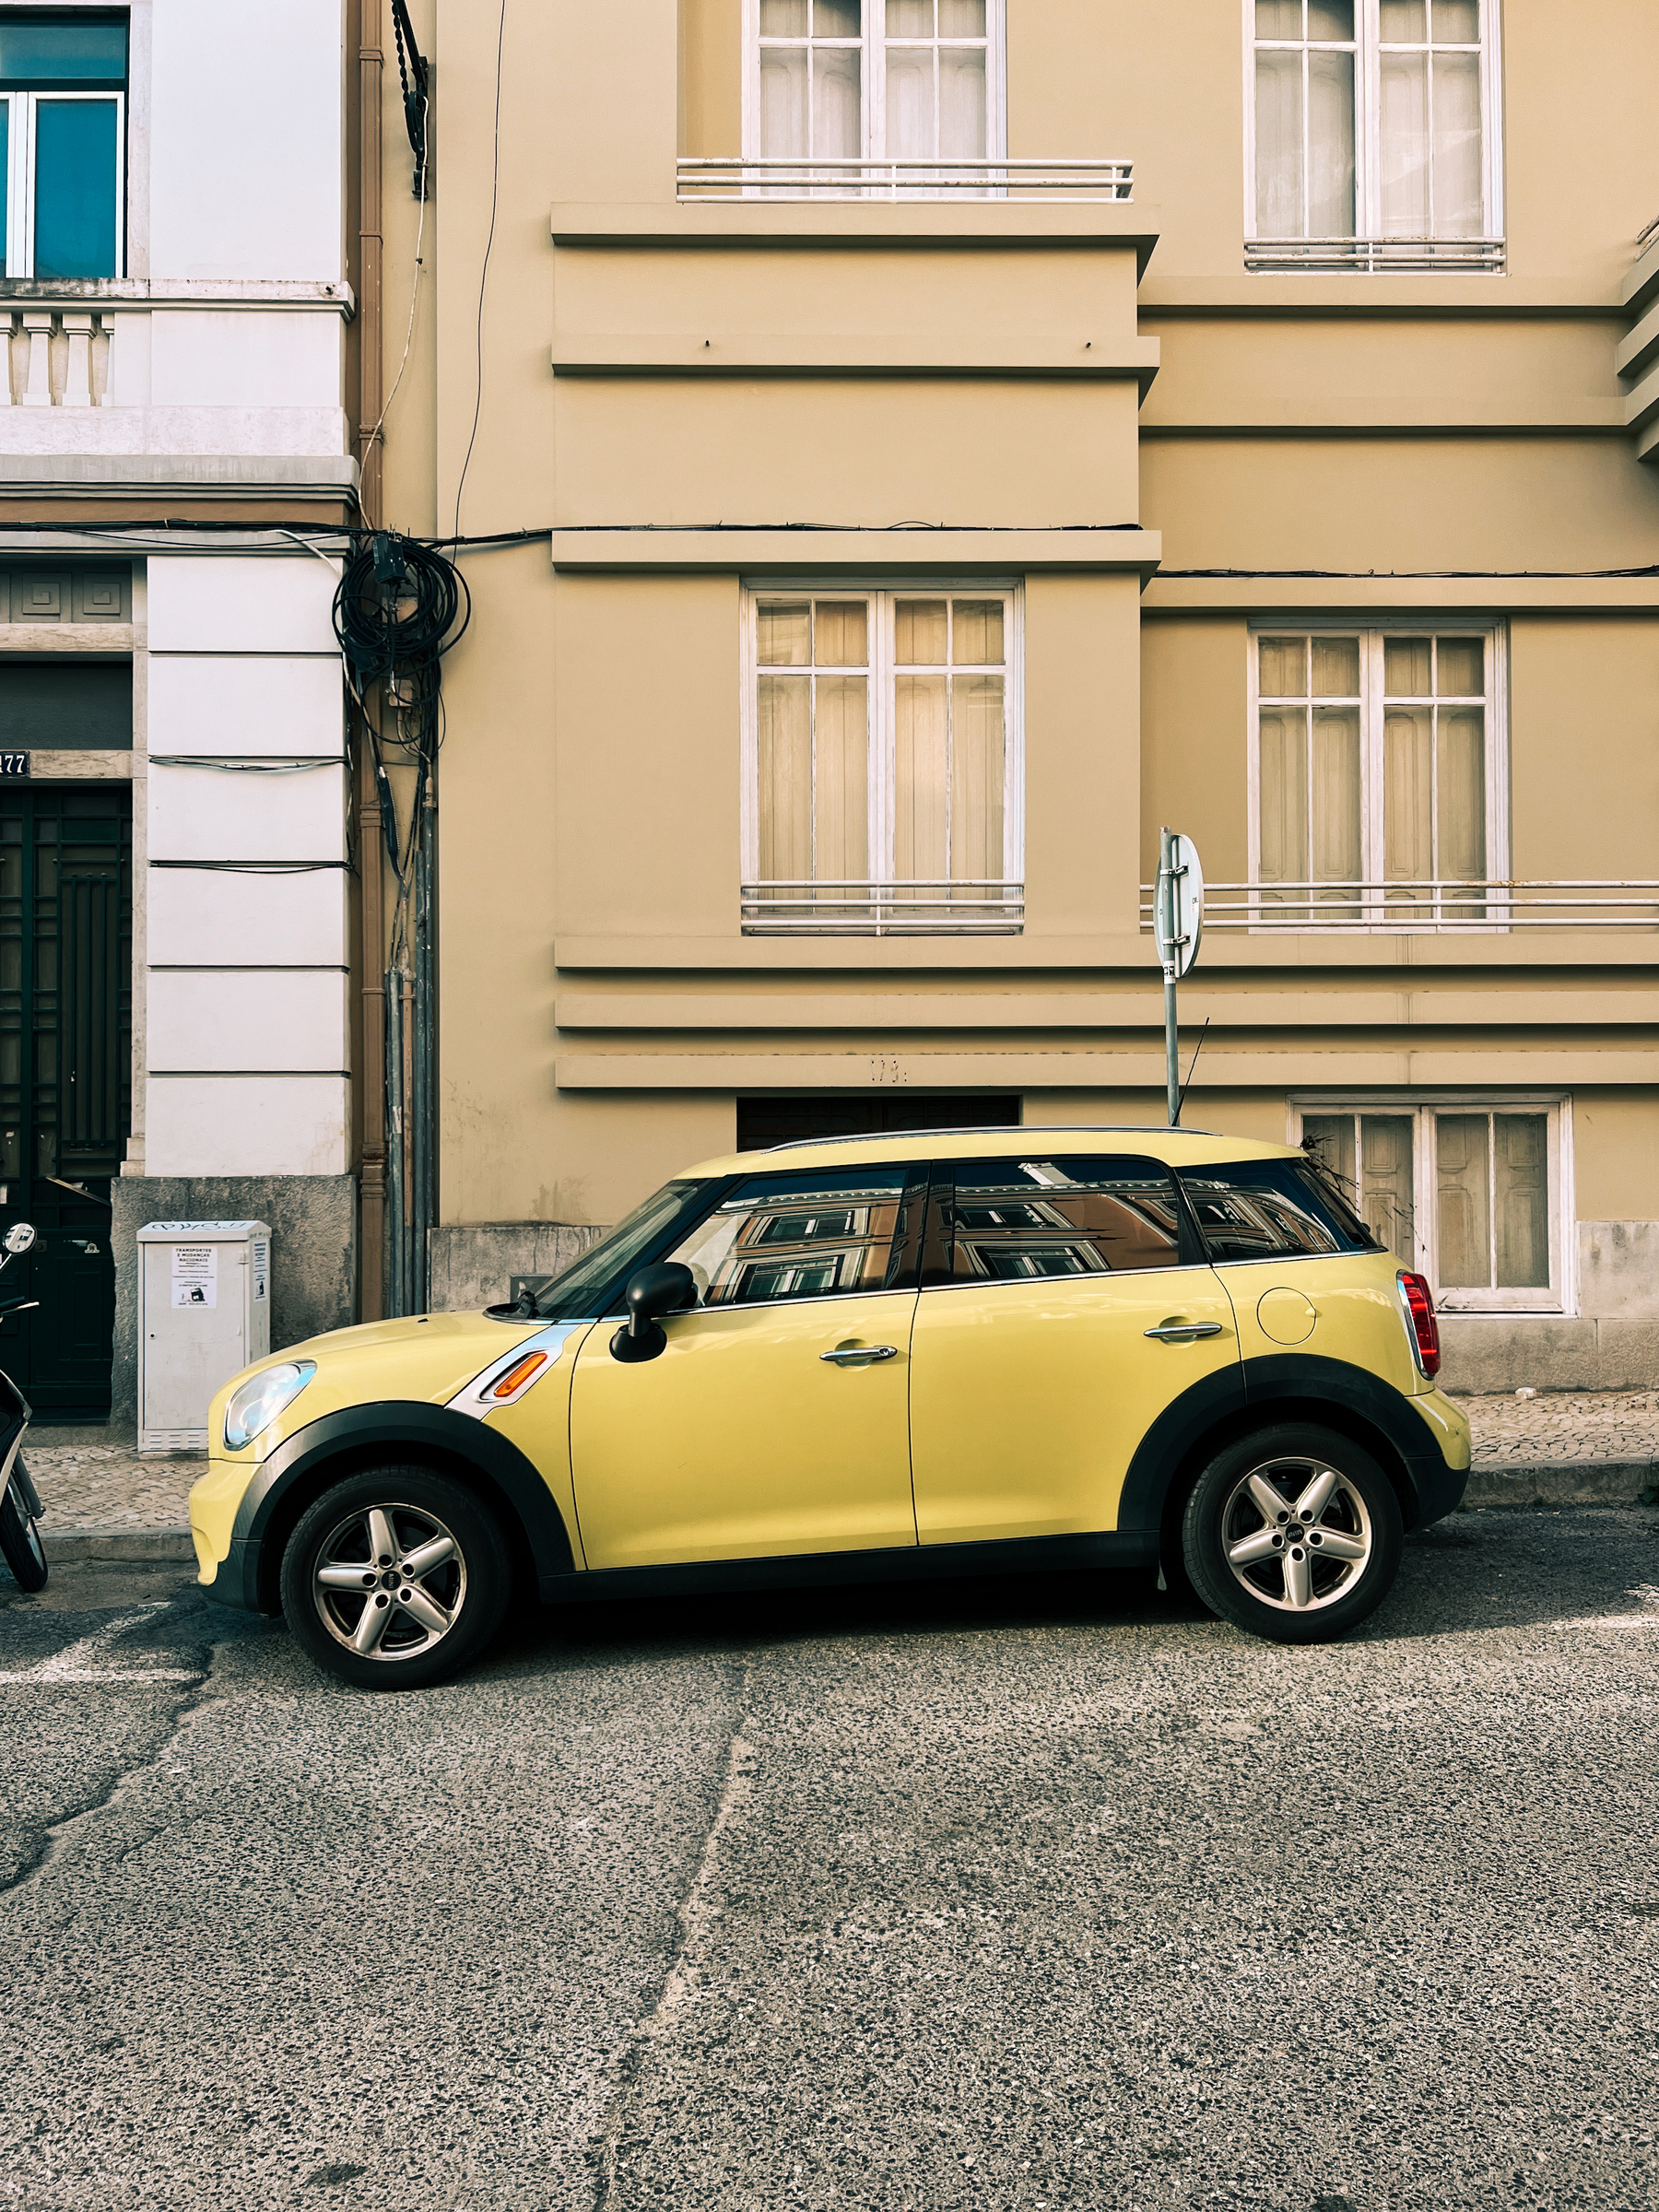 A yellow car parked in front of a yellow building.